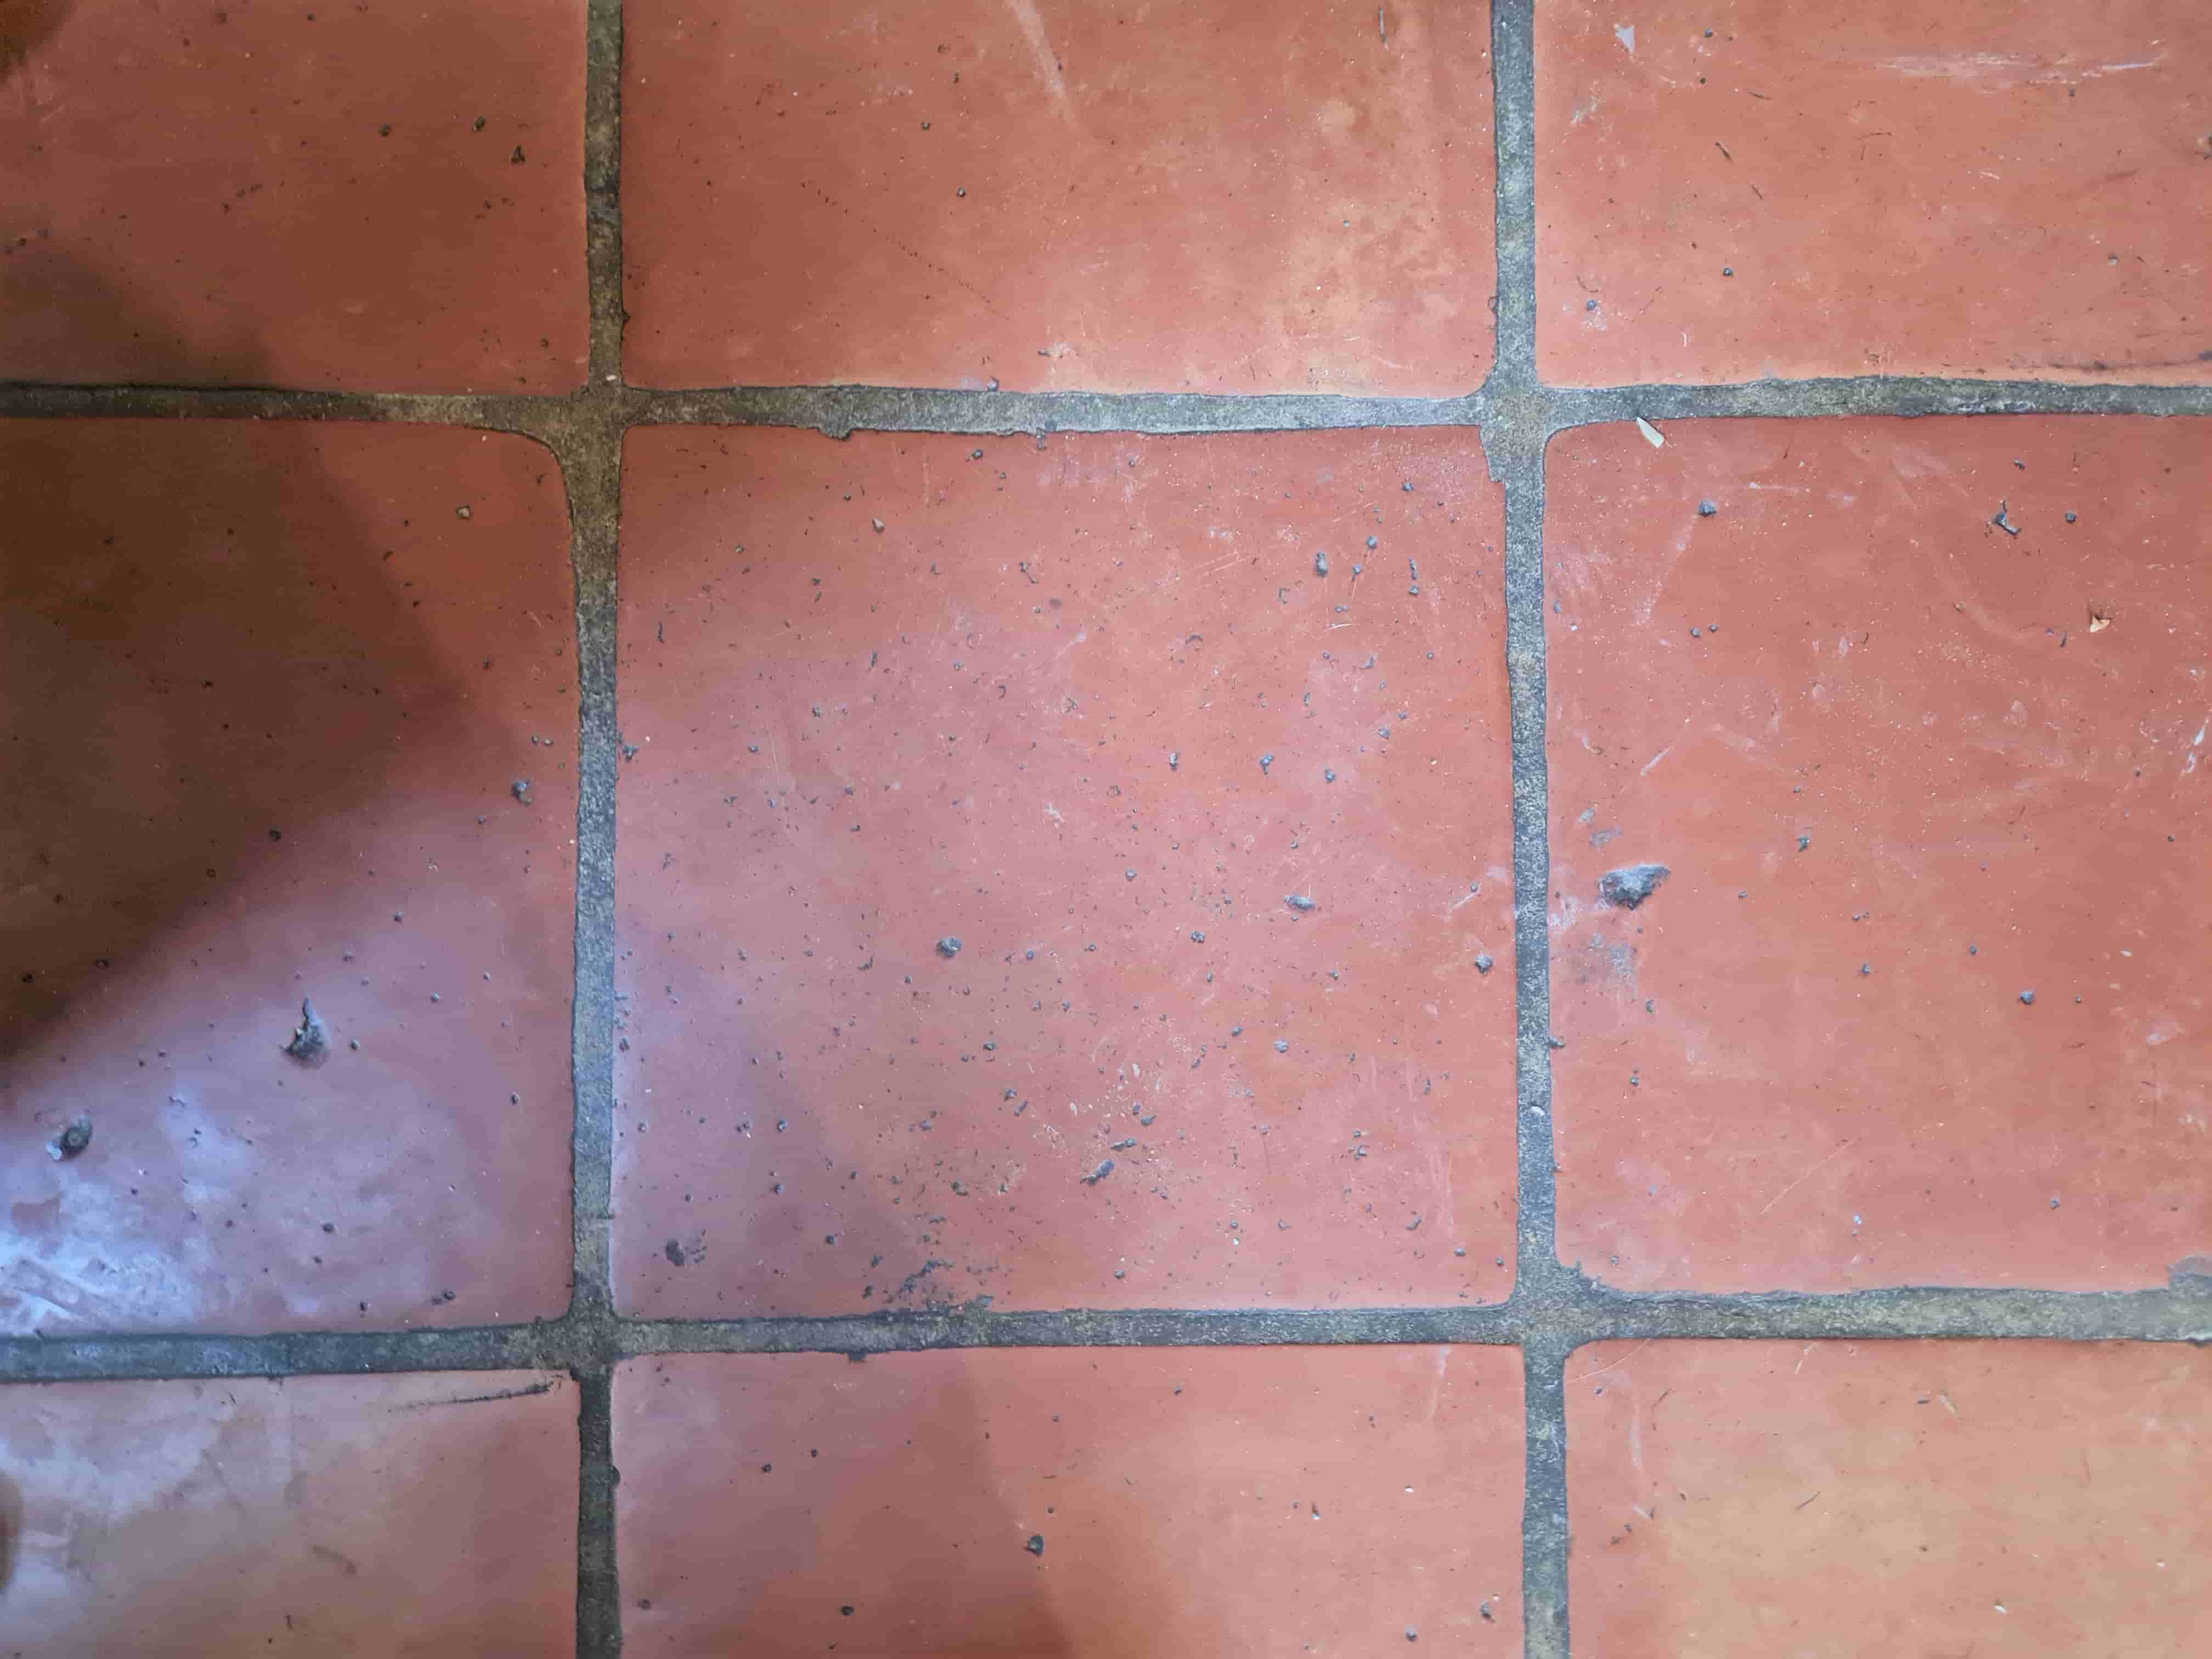 Terracotta Tiled Kitchen Floor Before Cleaning Whightgate Northwich